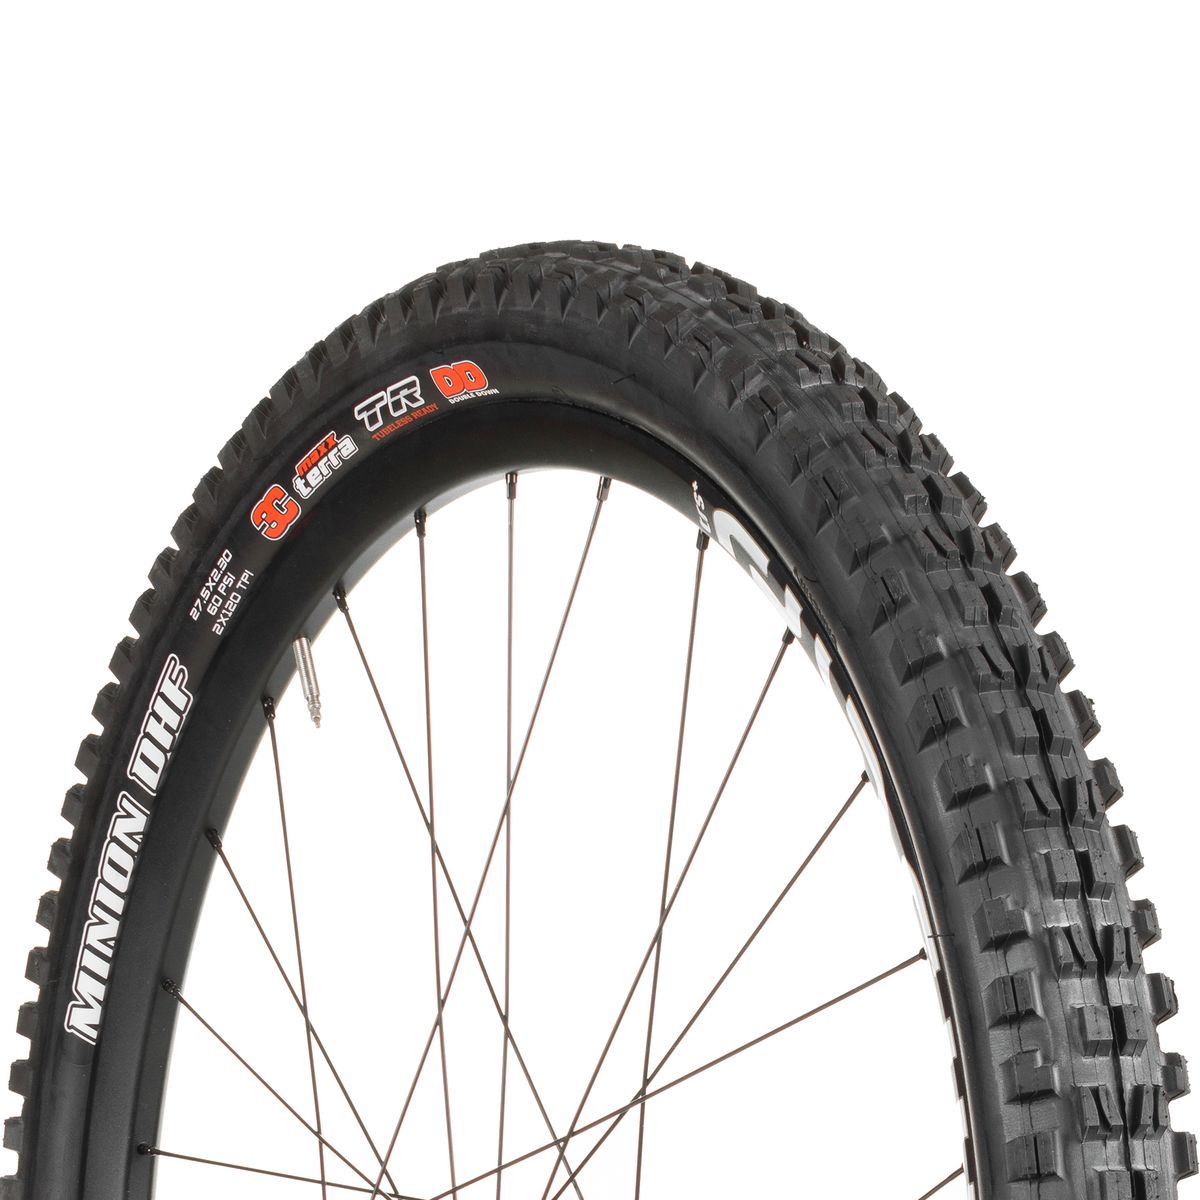 Maxxis Minion DHF 3C/Double Down/TR 27.5in Tire